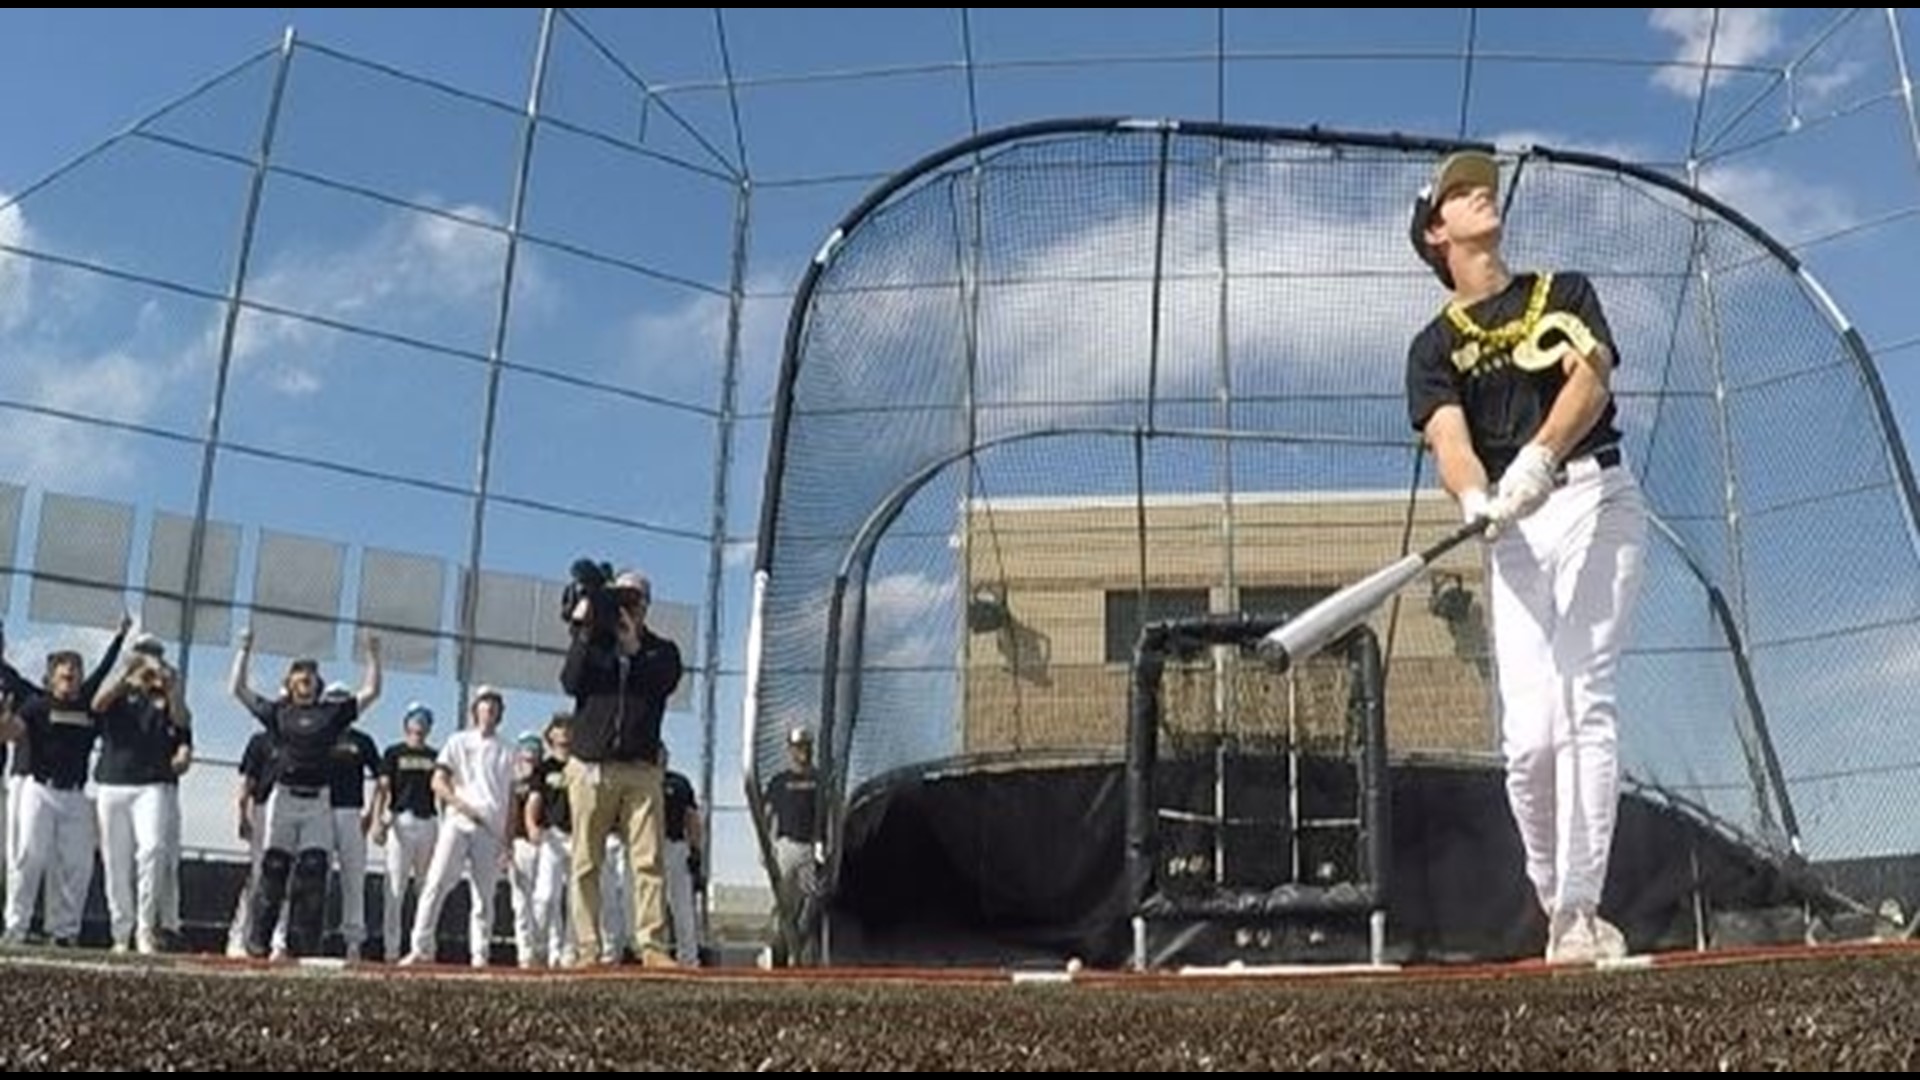 Hagner earns the Colorado high school athlete of the week award after his two grand slam performance